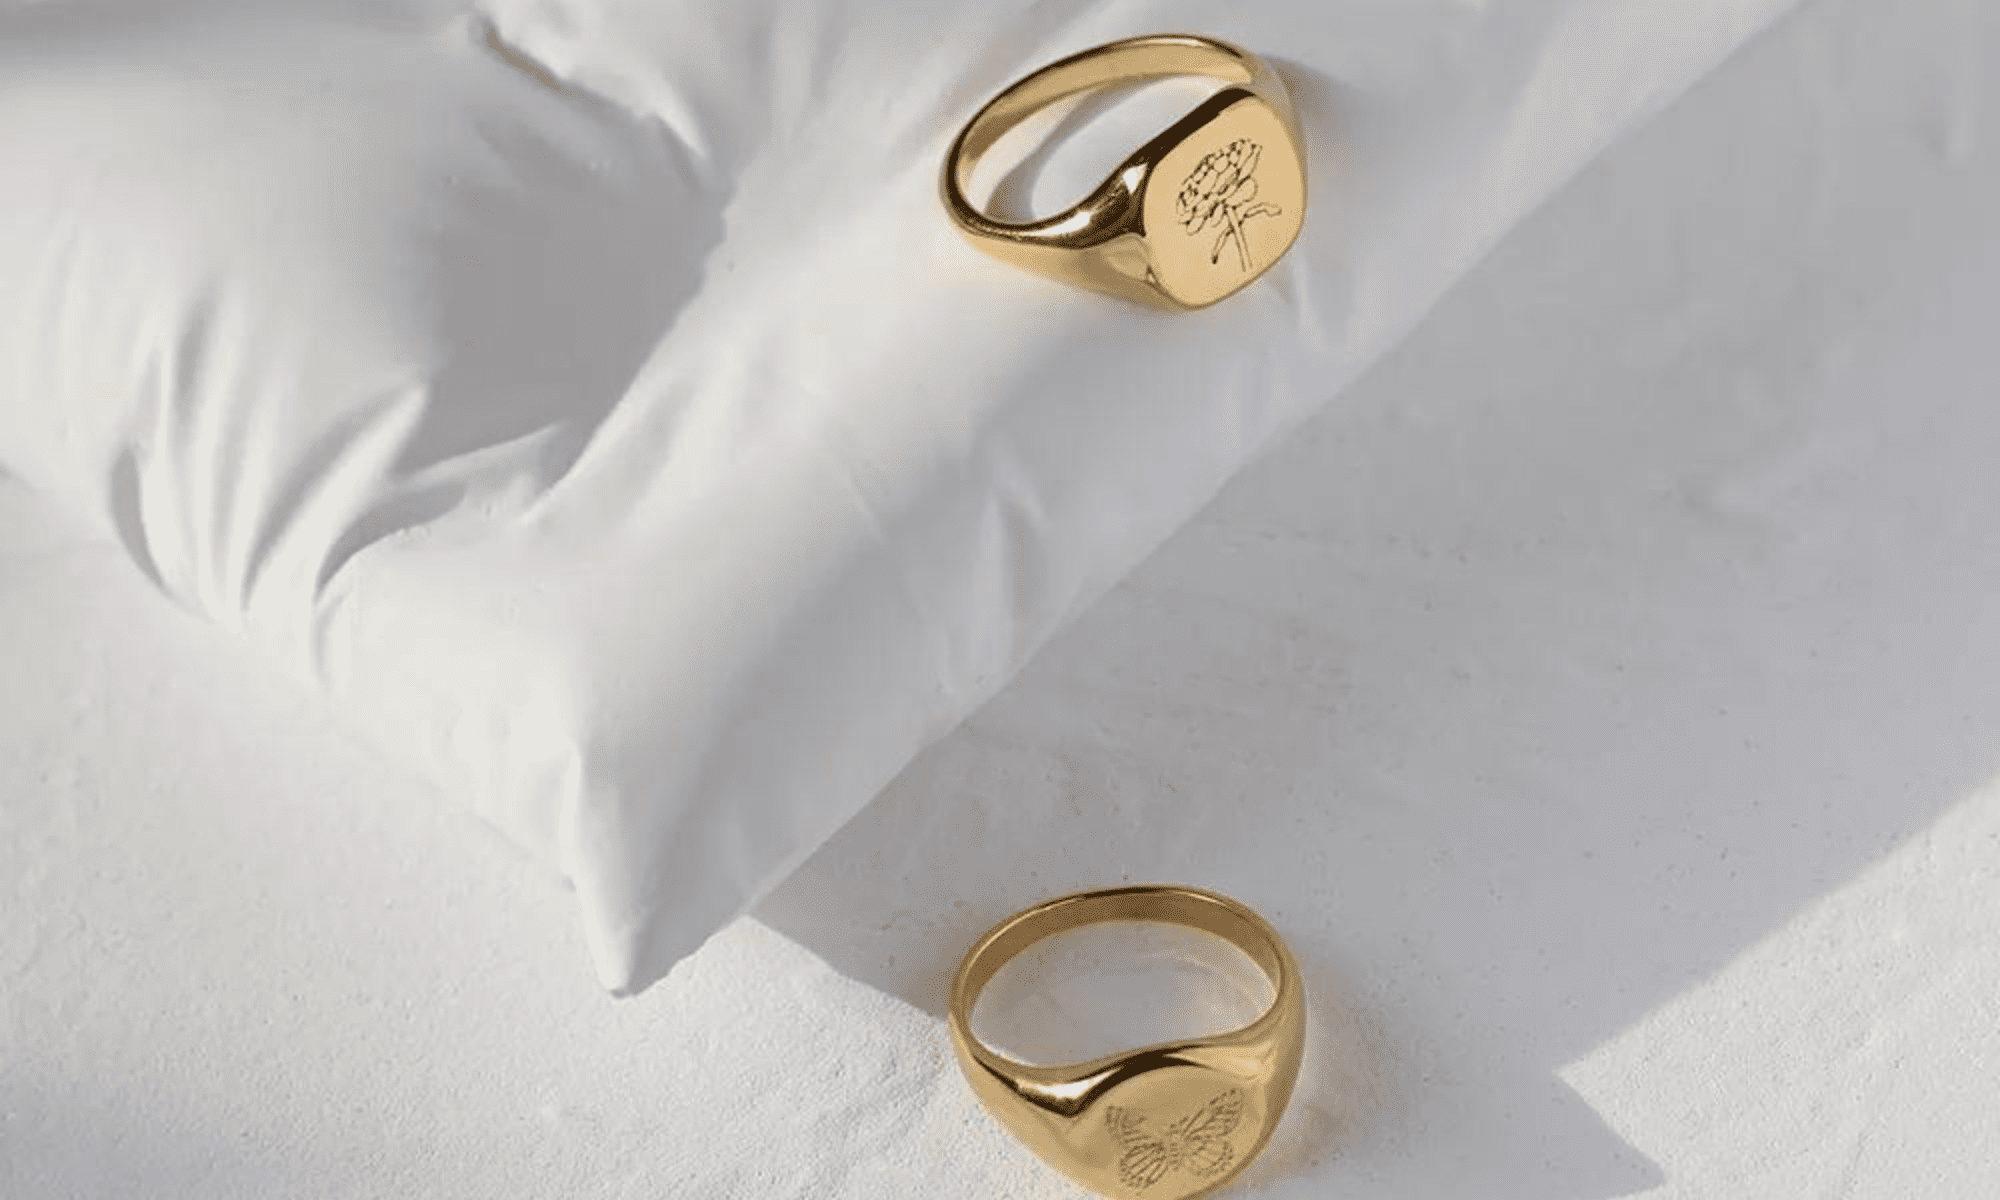 Taking Care Of Your Gold PVD Jewellery